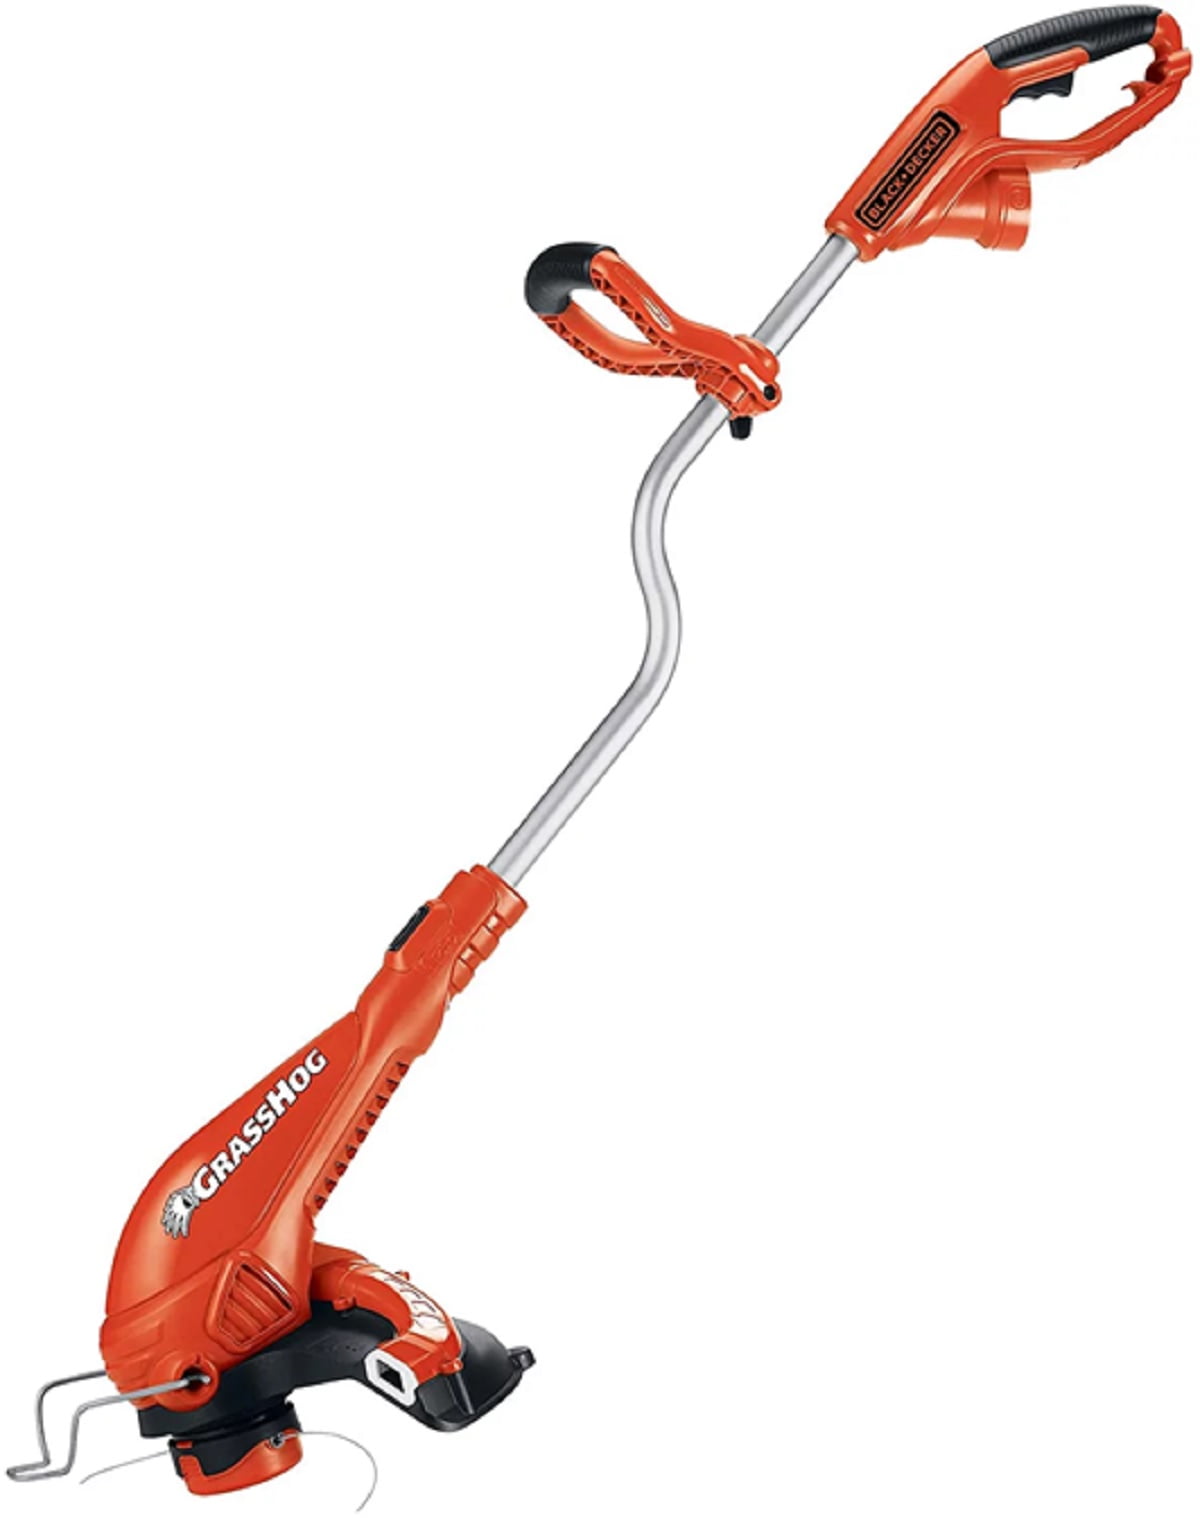 Black & Decker 14” Grass Hog Trimmer Gh750-B3, Brush cutter with powerful  5.5 Amps motor for efficient cutting in bushes and overgrowth, centrifugal